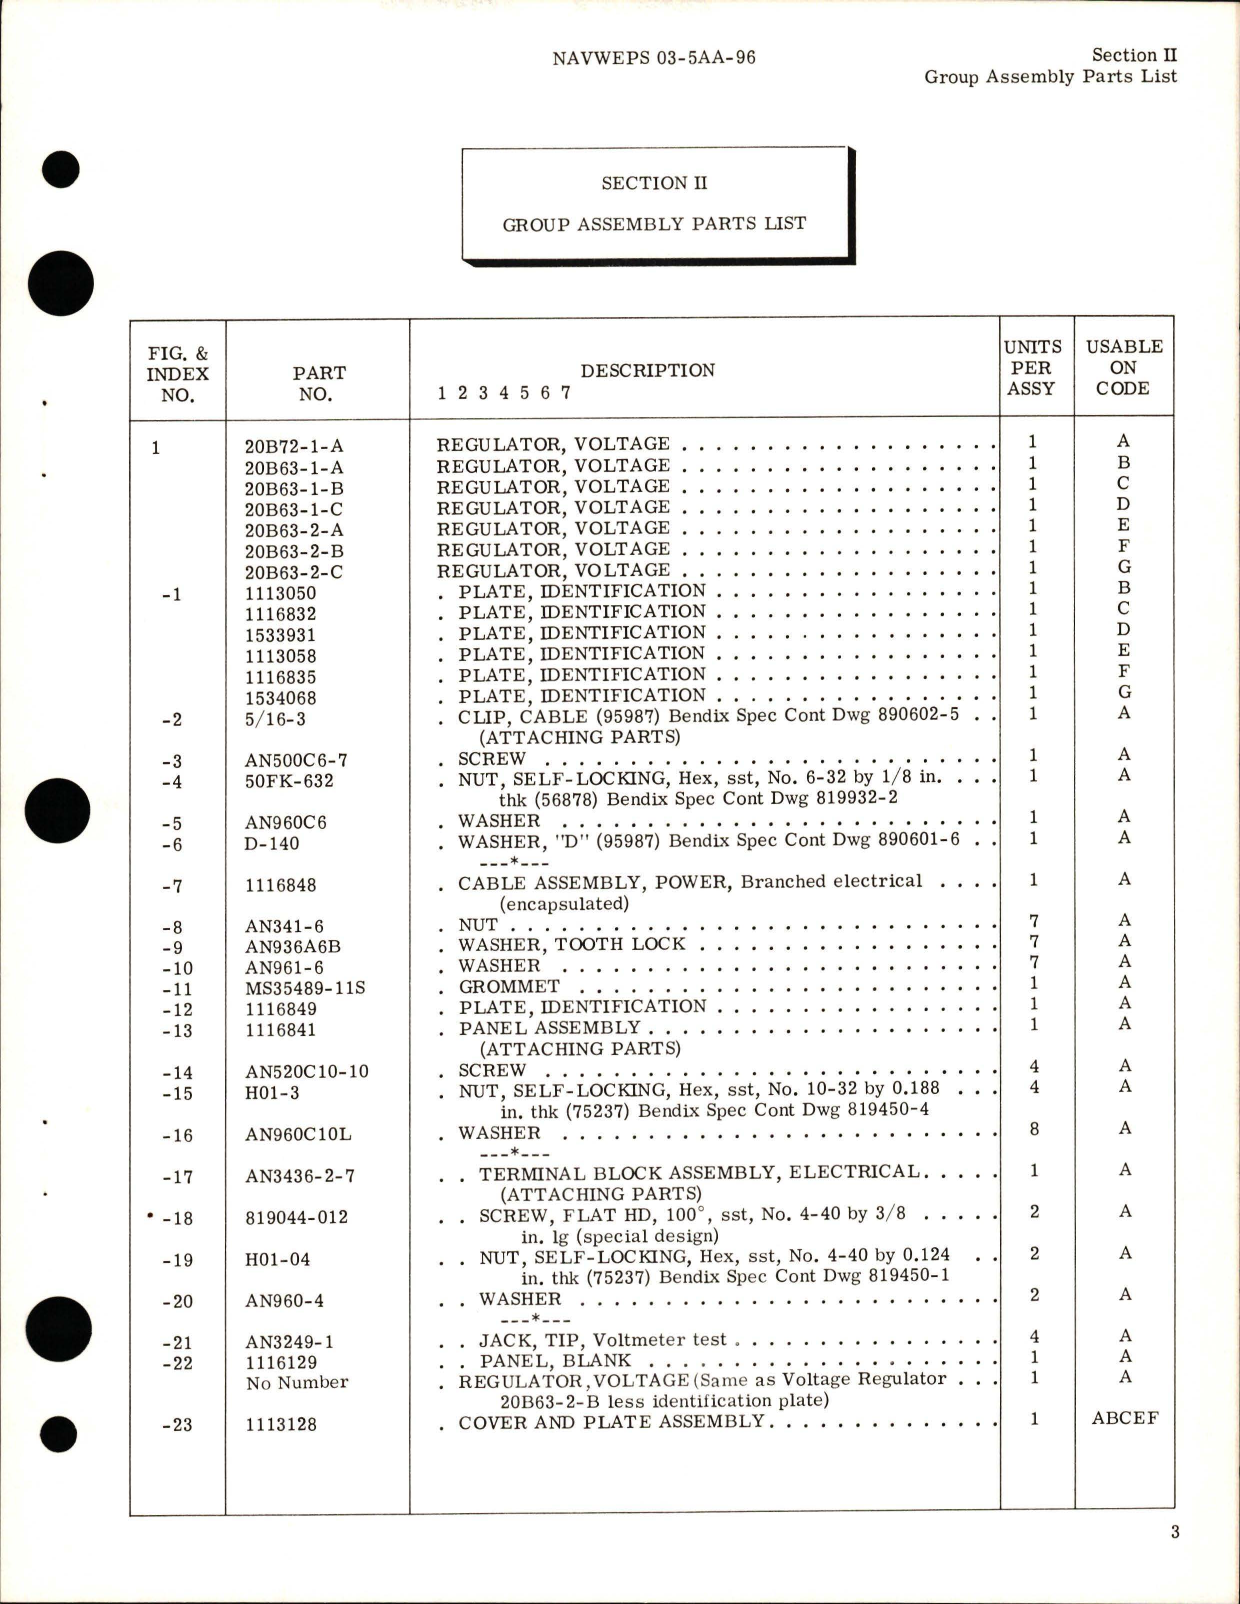 Sample page 5 from AirCorps Library document: Illustrated Parts Breakdown for Voltage Regulator - Types 20B63-1-A. 20B63-1-B, 20B63-1-C, 20B63-2-A, 20B63-2-B, 20B63-2-C, 20B72-1-A 